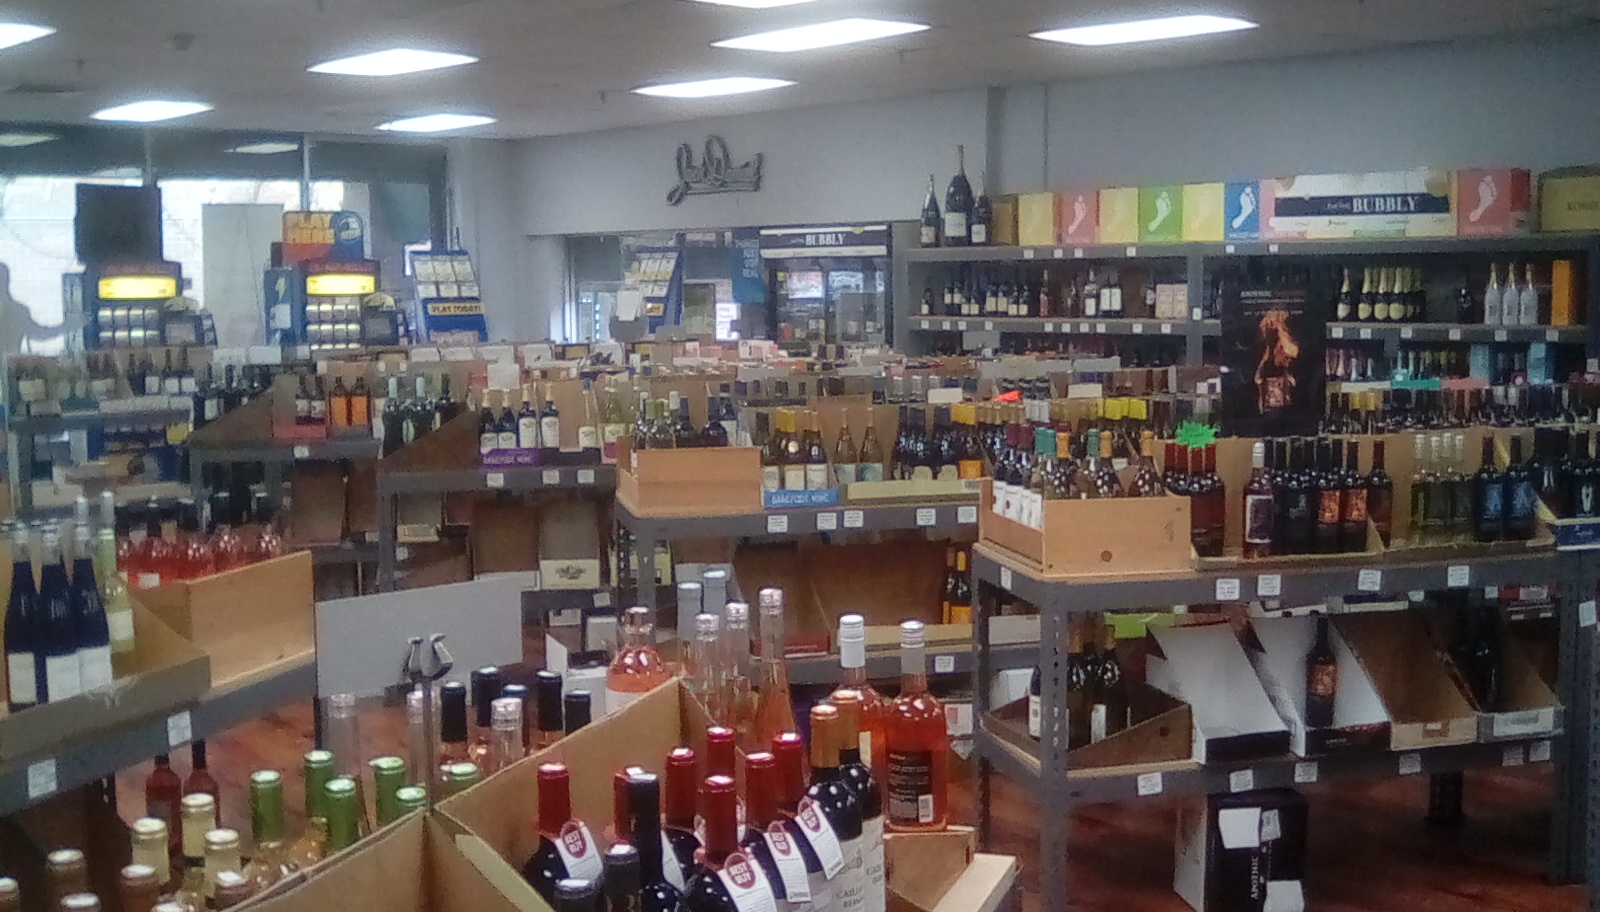 Businesses For Sale-Wine Store-Buy a Business